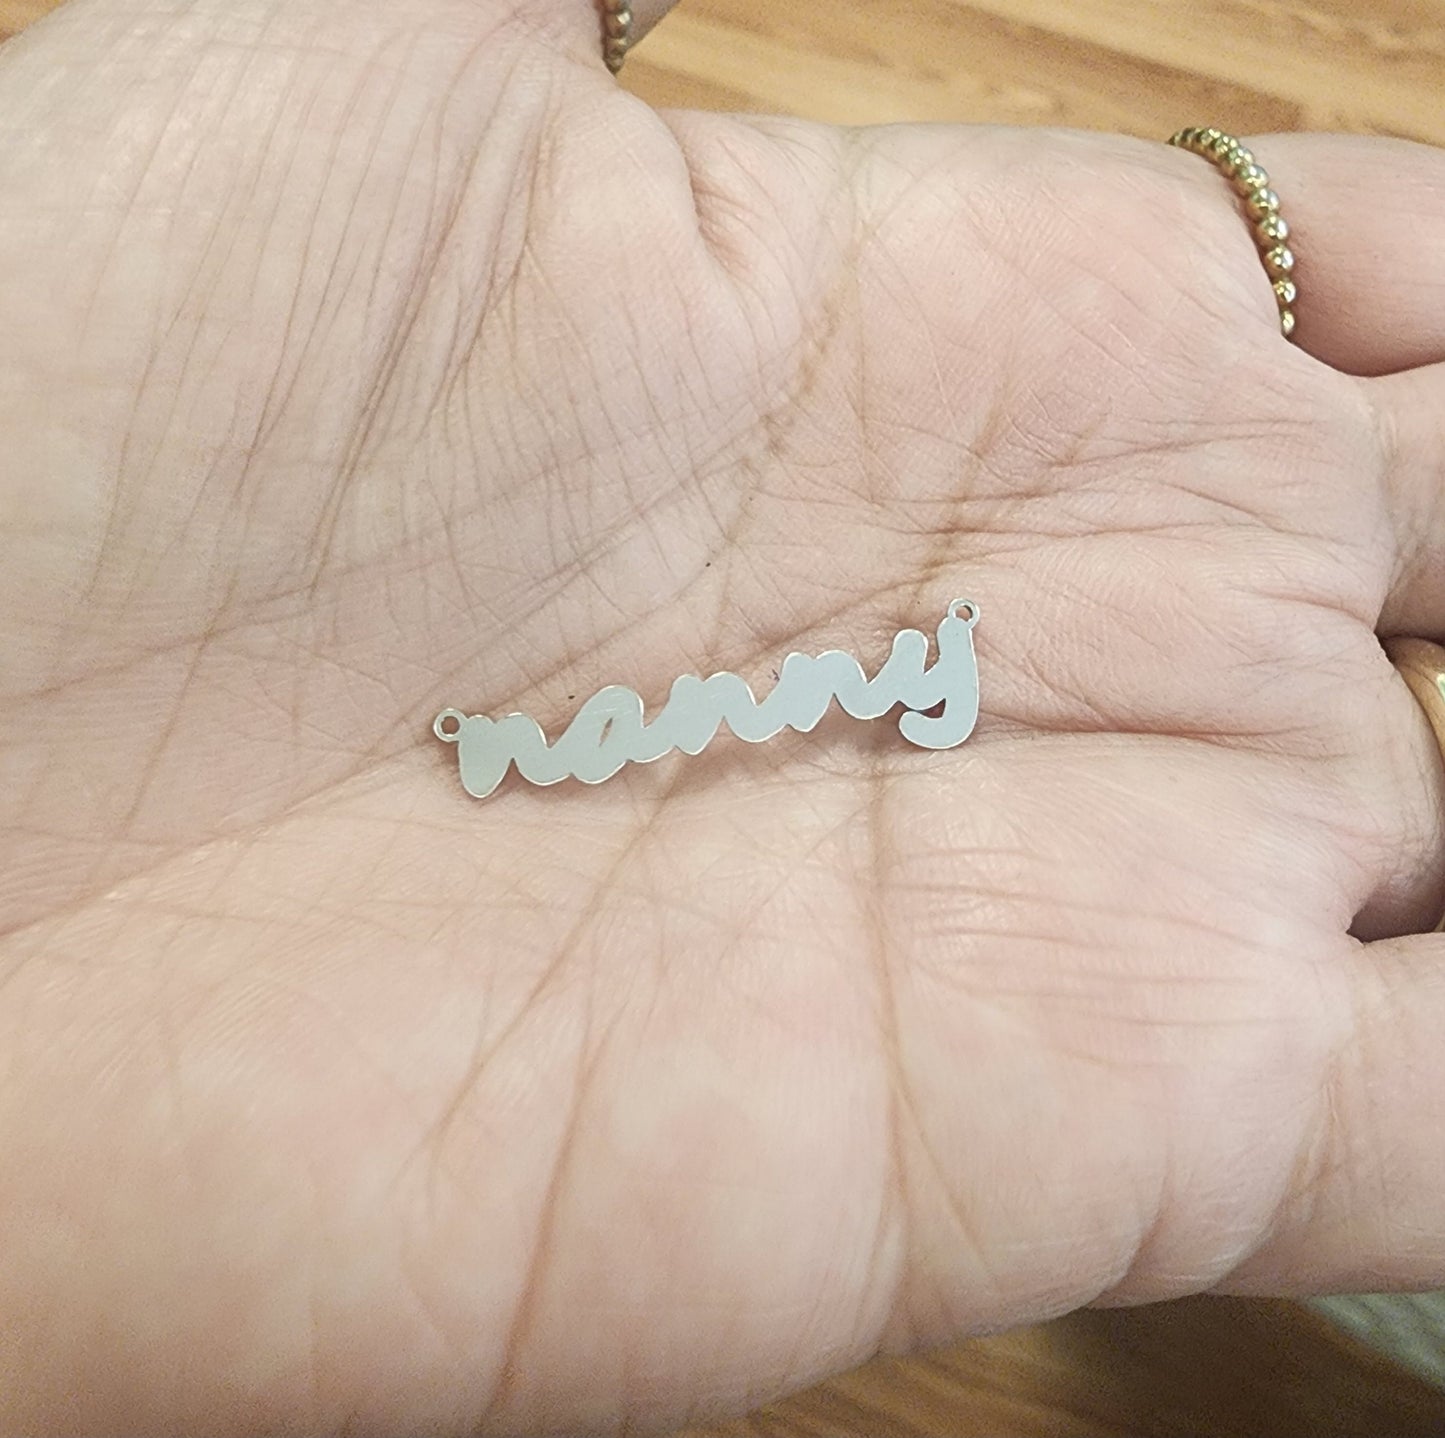 gold filled or sterling silver  nanny connector - we can make any word or small shape - permanent jewelry word connectors